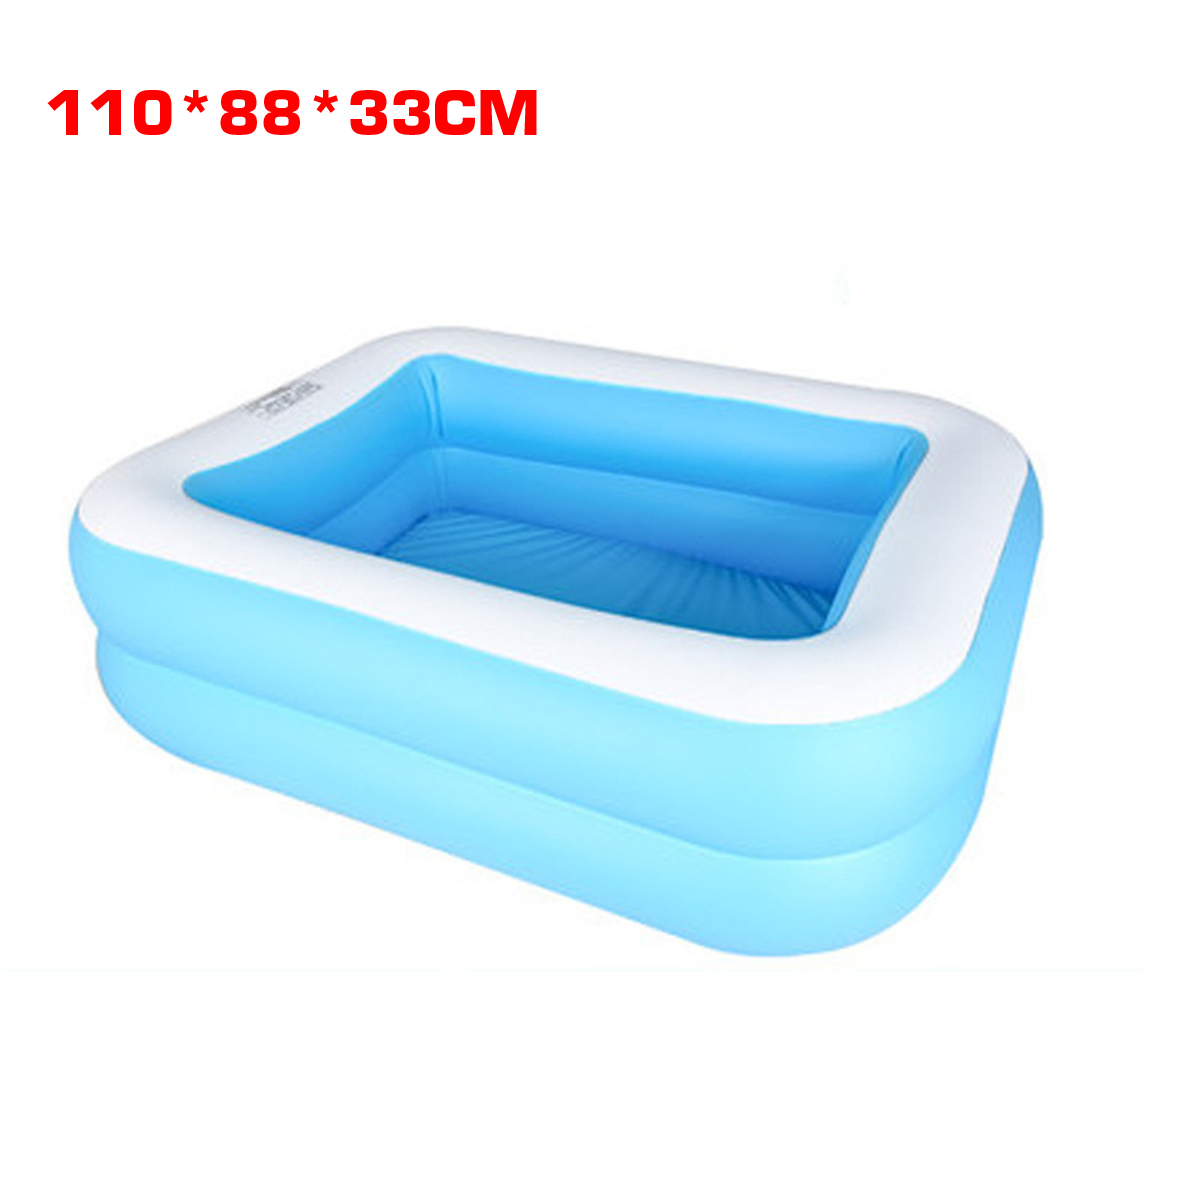 Portable-Outdoor-Inflatable-Swimming-Pool-Childrens-Pool-Family--Indoor-Large-Bathing-Tub-For-Baby-K-1715012-5